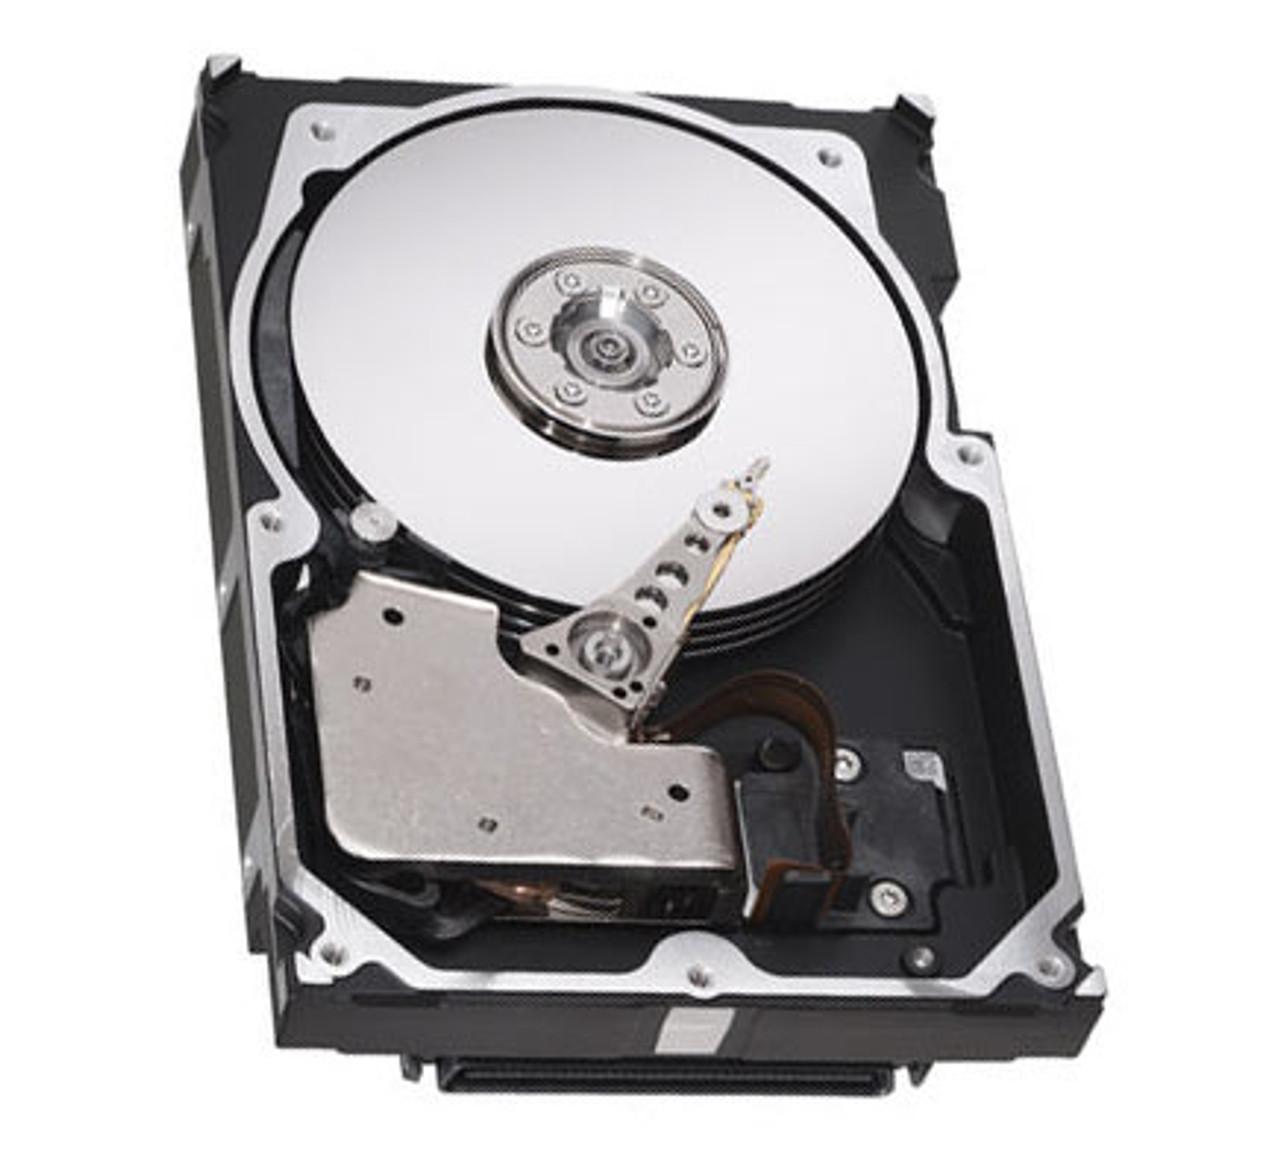 06P5318 - IBM 73.4GB 10000RPM 80-Pin Ultra-160 SCSI 3.5-inch Hot Pluggable Hard Drive with Tray